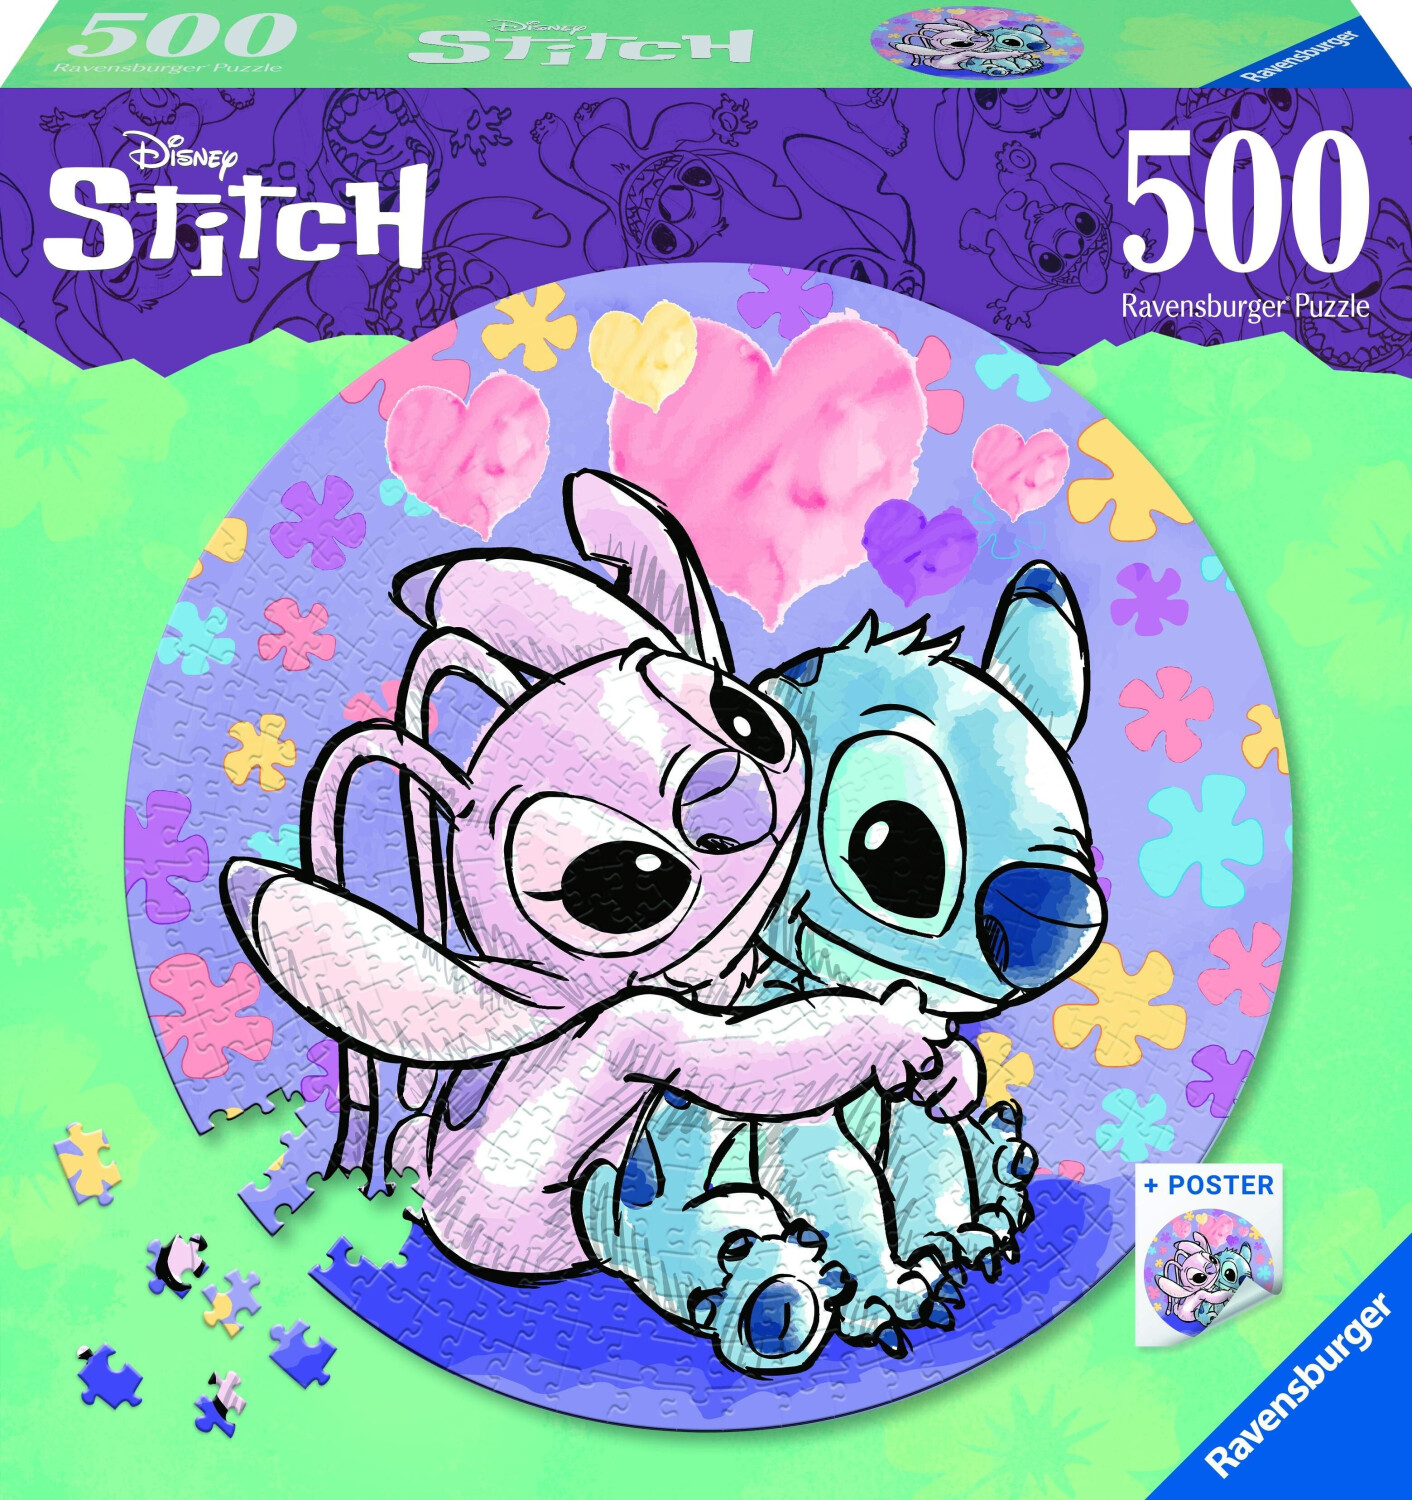 Buy Ravensburger Disney: Stitch (17581) from £13.99 (Today) – Best Deals on